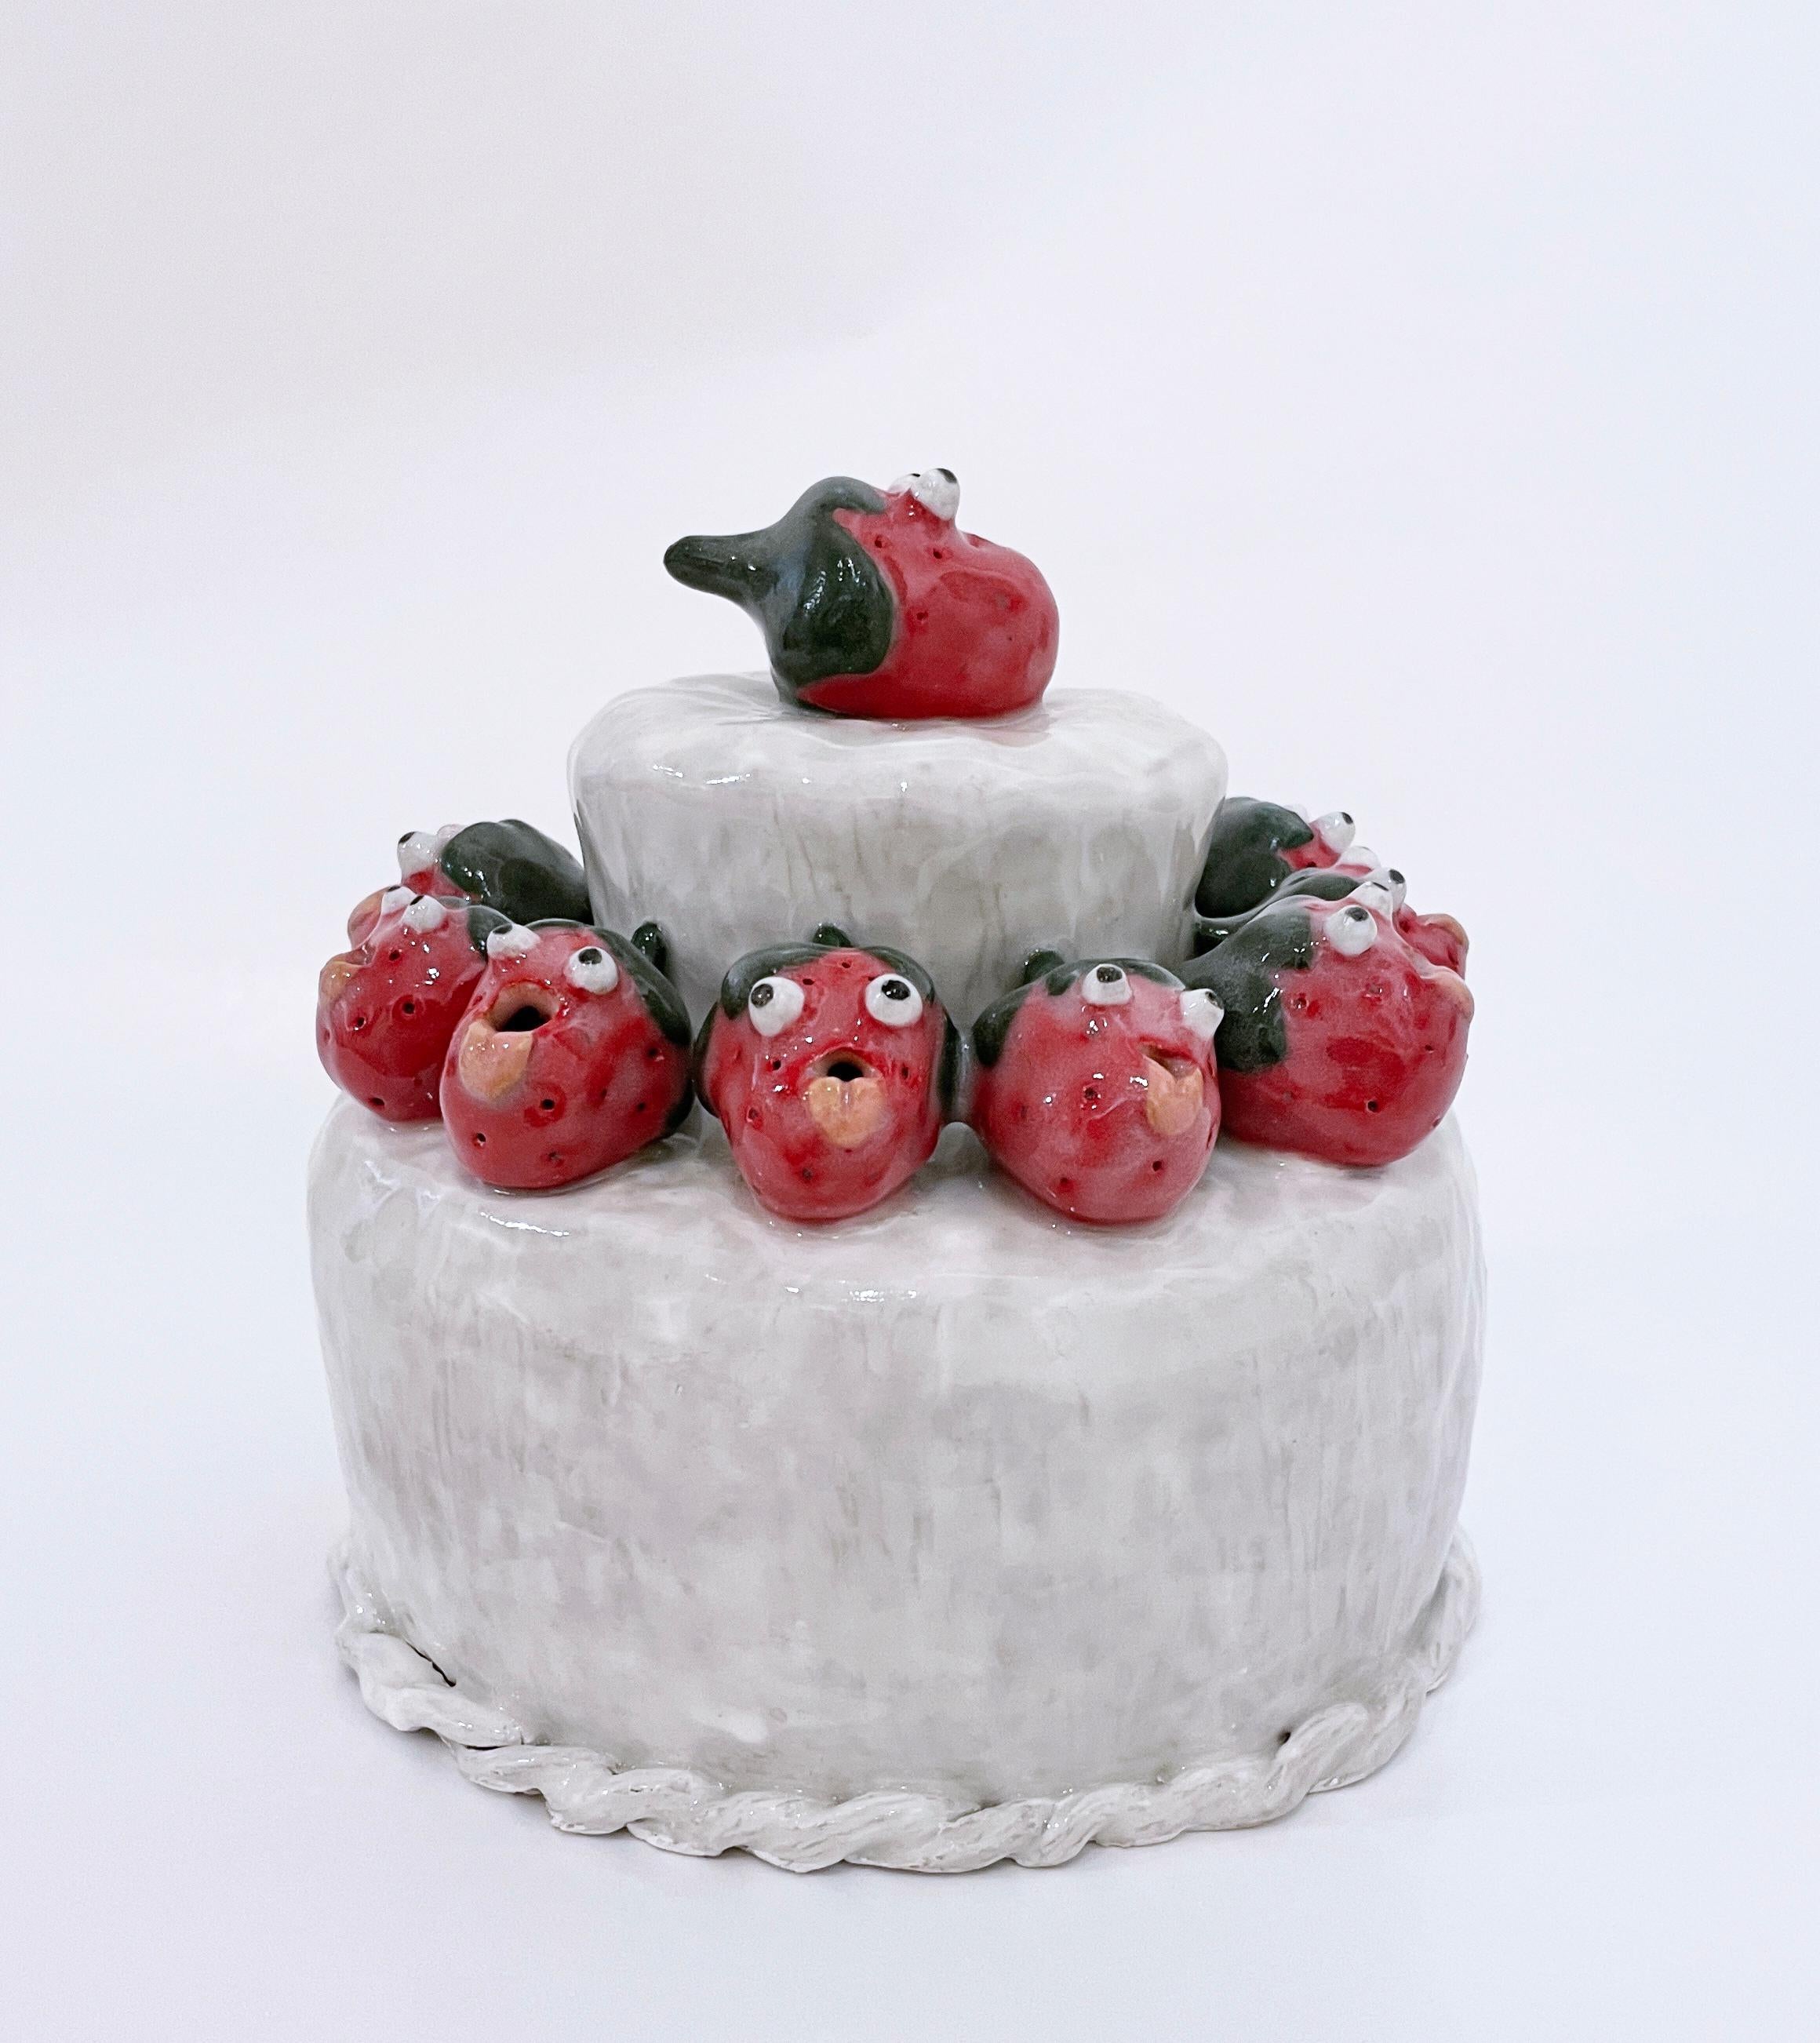 Happy Birthday (2022), Glazed ceramic cake sculpture with strawberry faces - Sculpture by Sarah Hughes